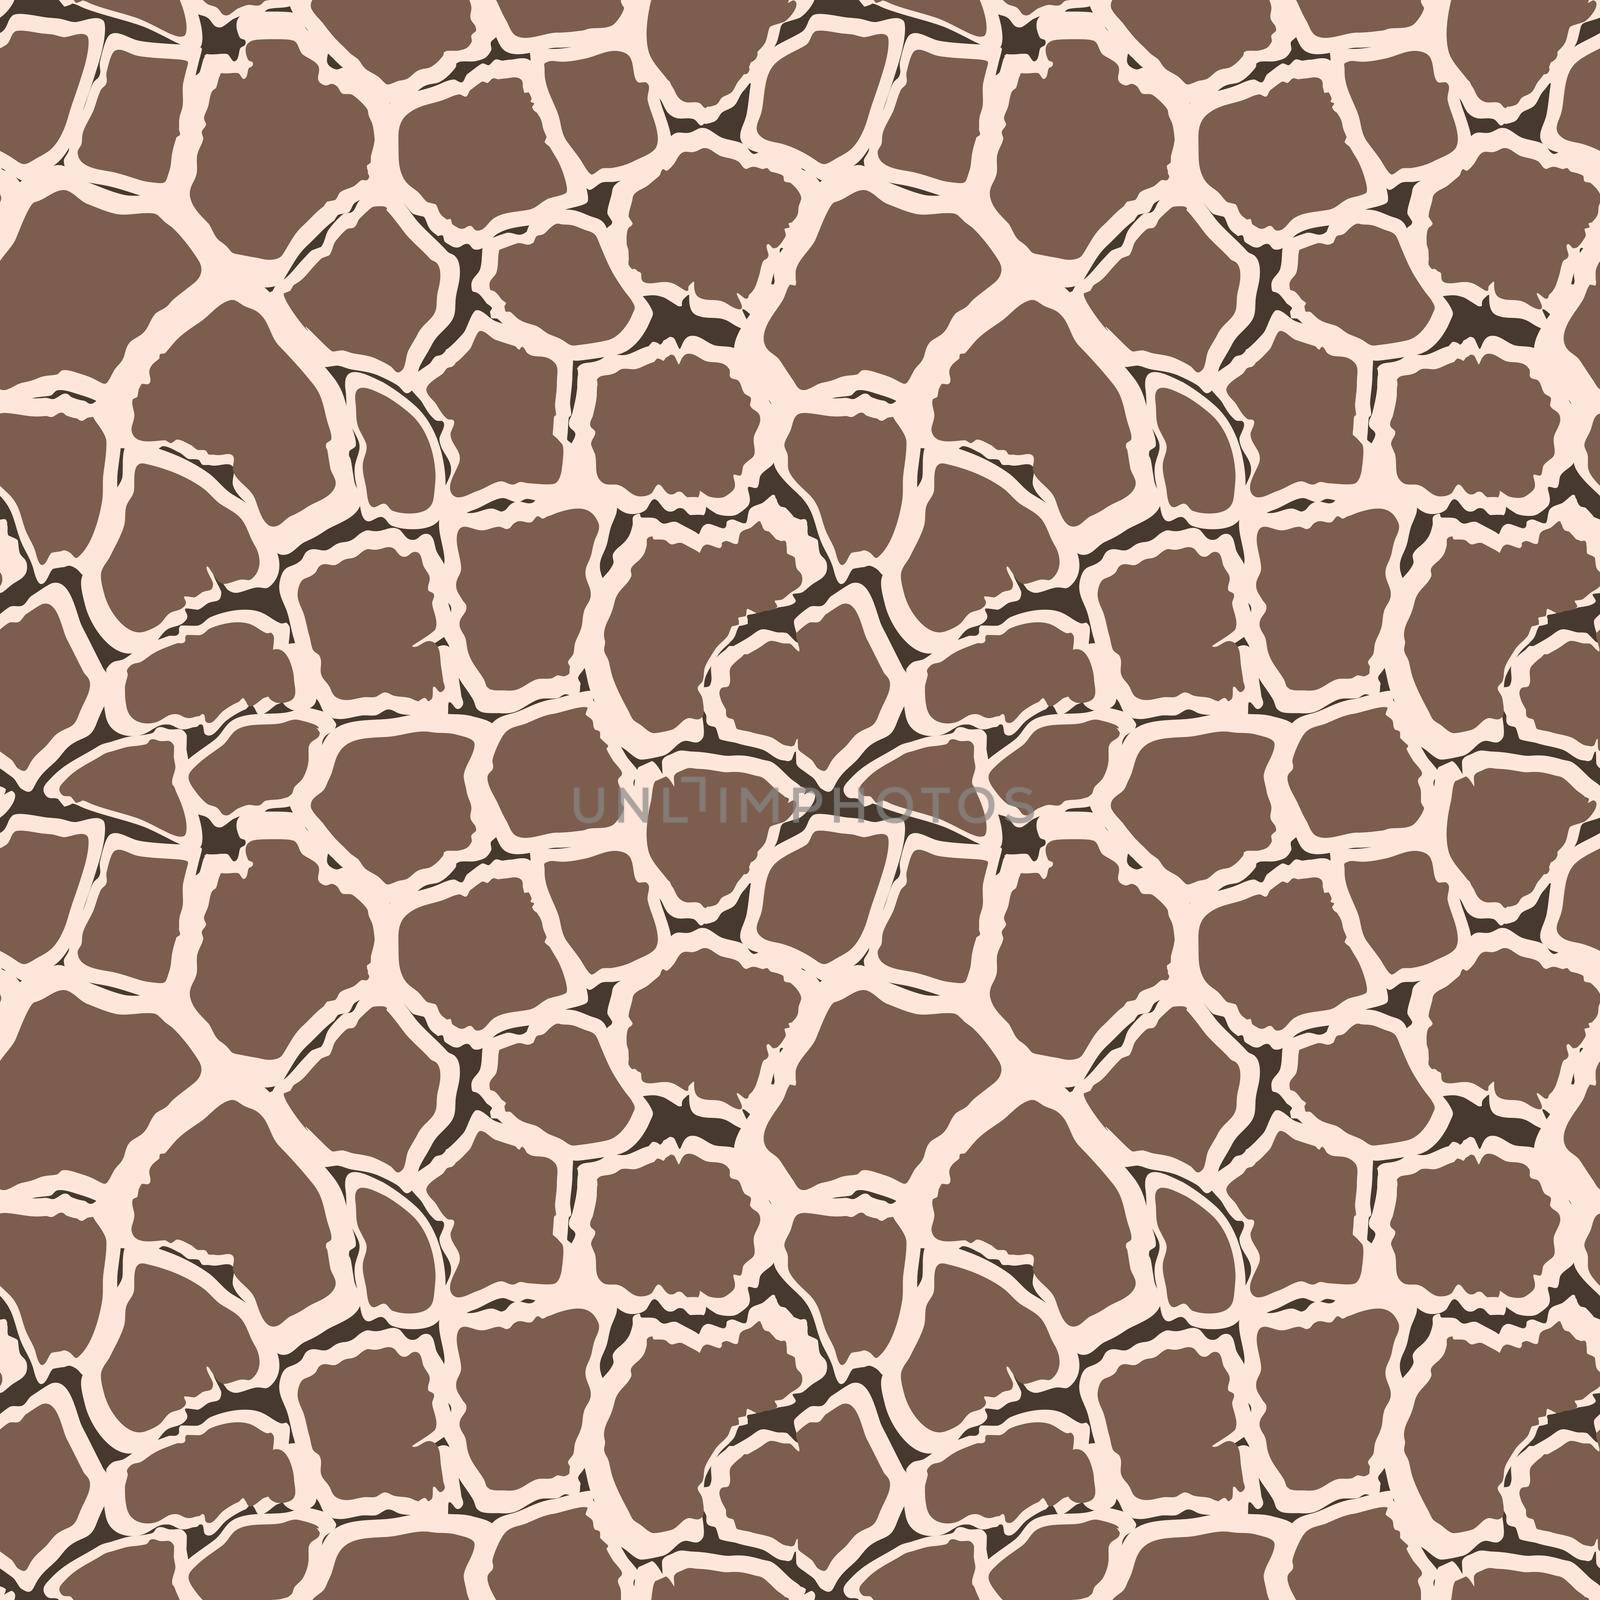 Abstract modern giraffe seamless pattern. Animals trendy background. Beige decorative vector stock illustration for print, card, postcard, fabric, textile. Modern ornament of stylized skin